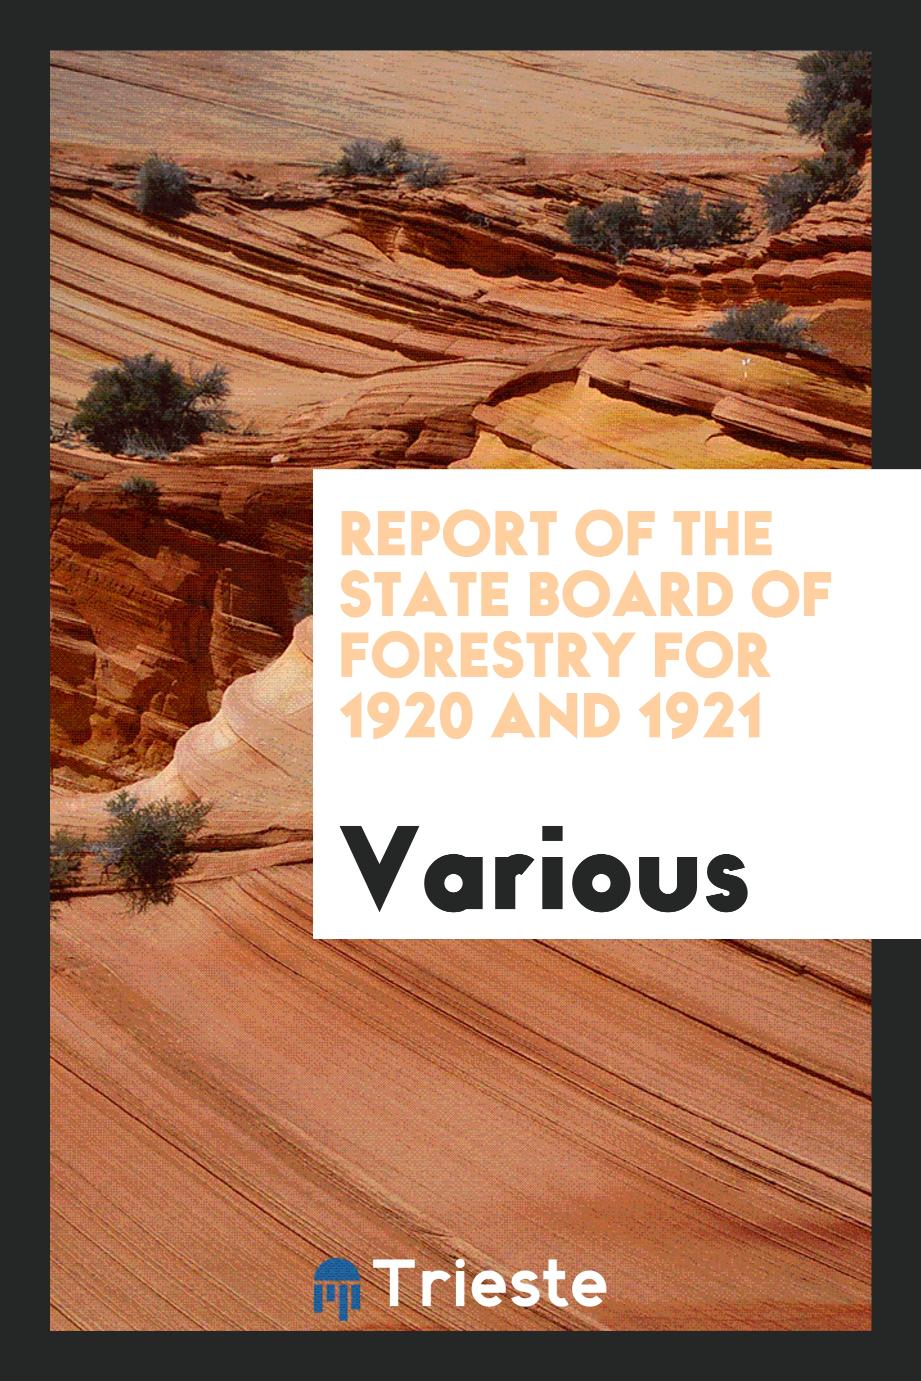 Report of the State Board of Forestry for 1920 and 1921